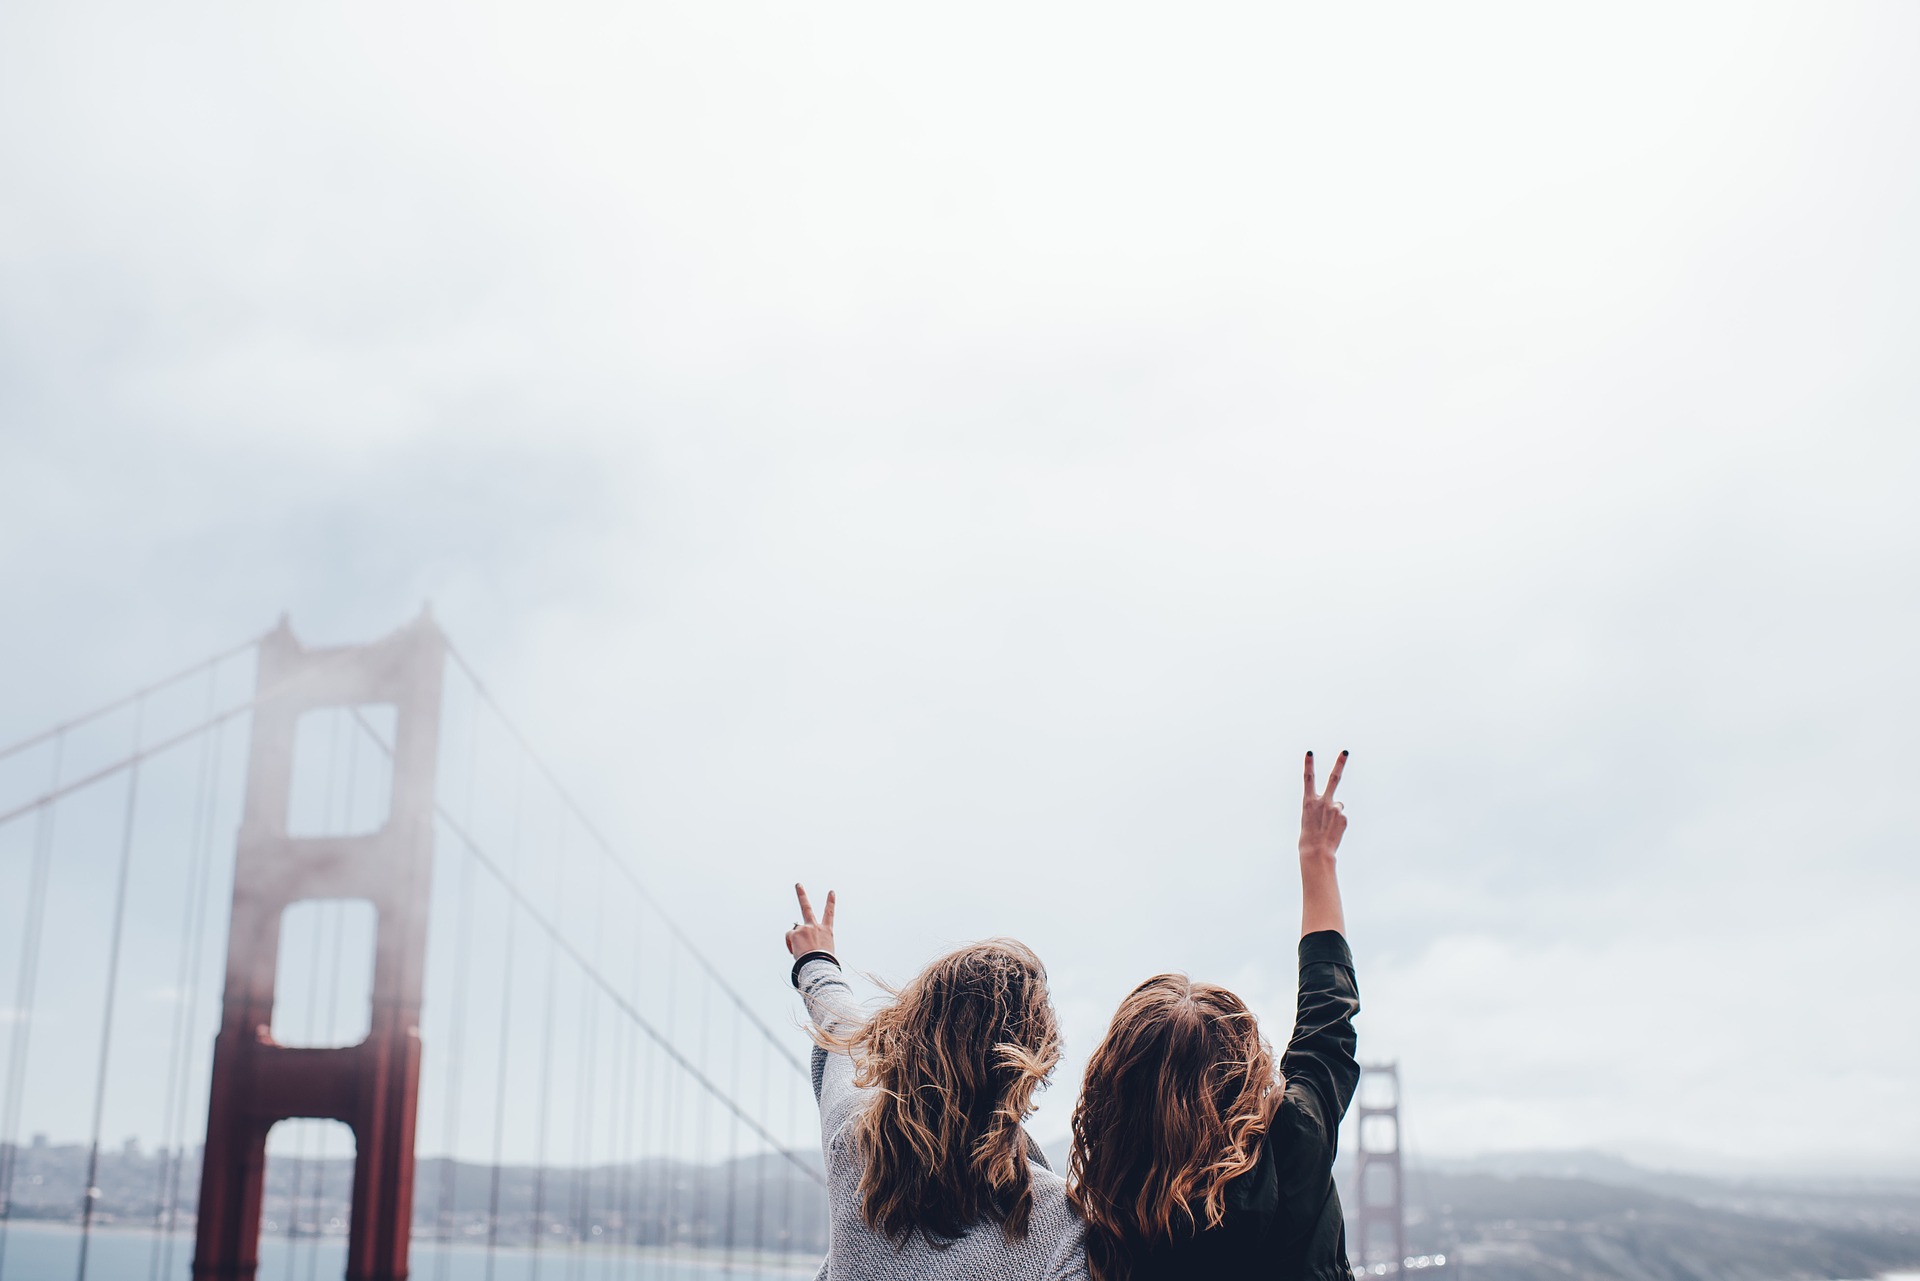 10 Things to Do in San Francisco